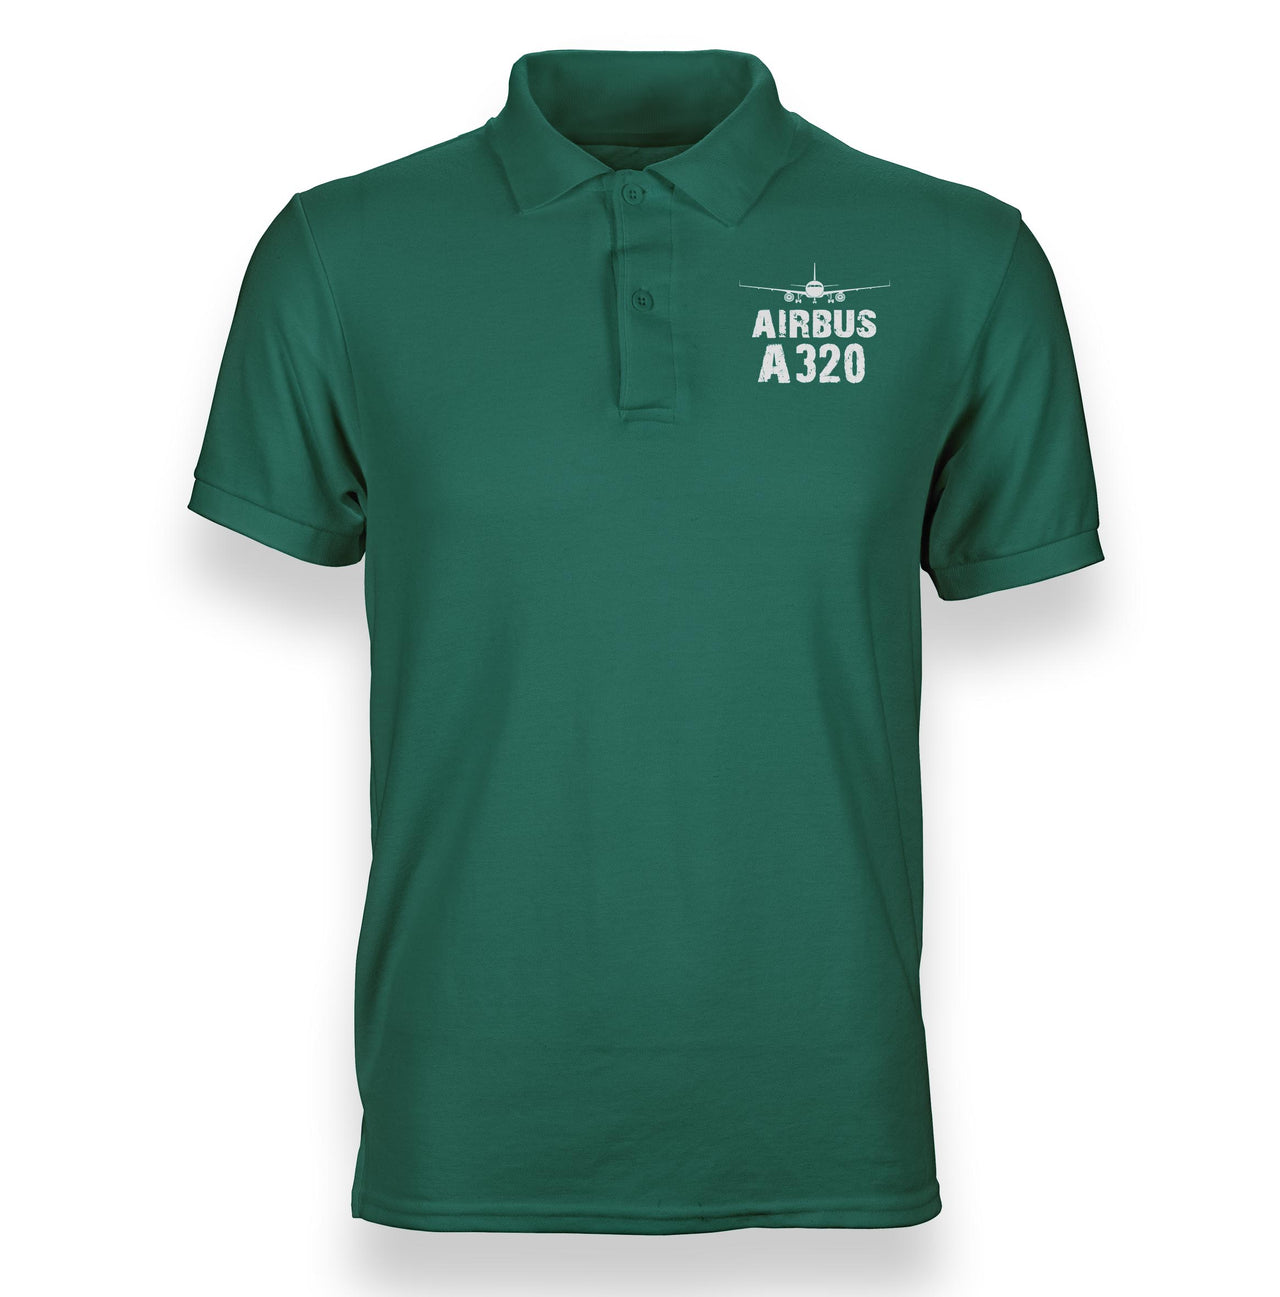 Airbus A320 & Plane Designed Polo T-Shirts